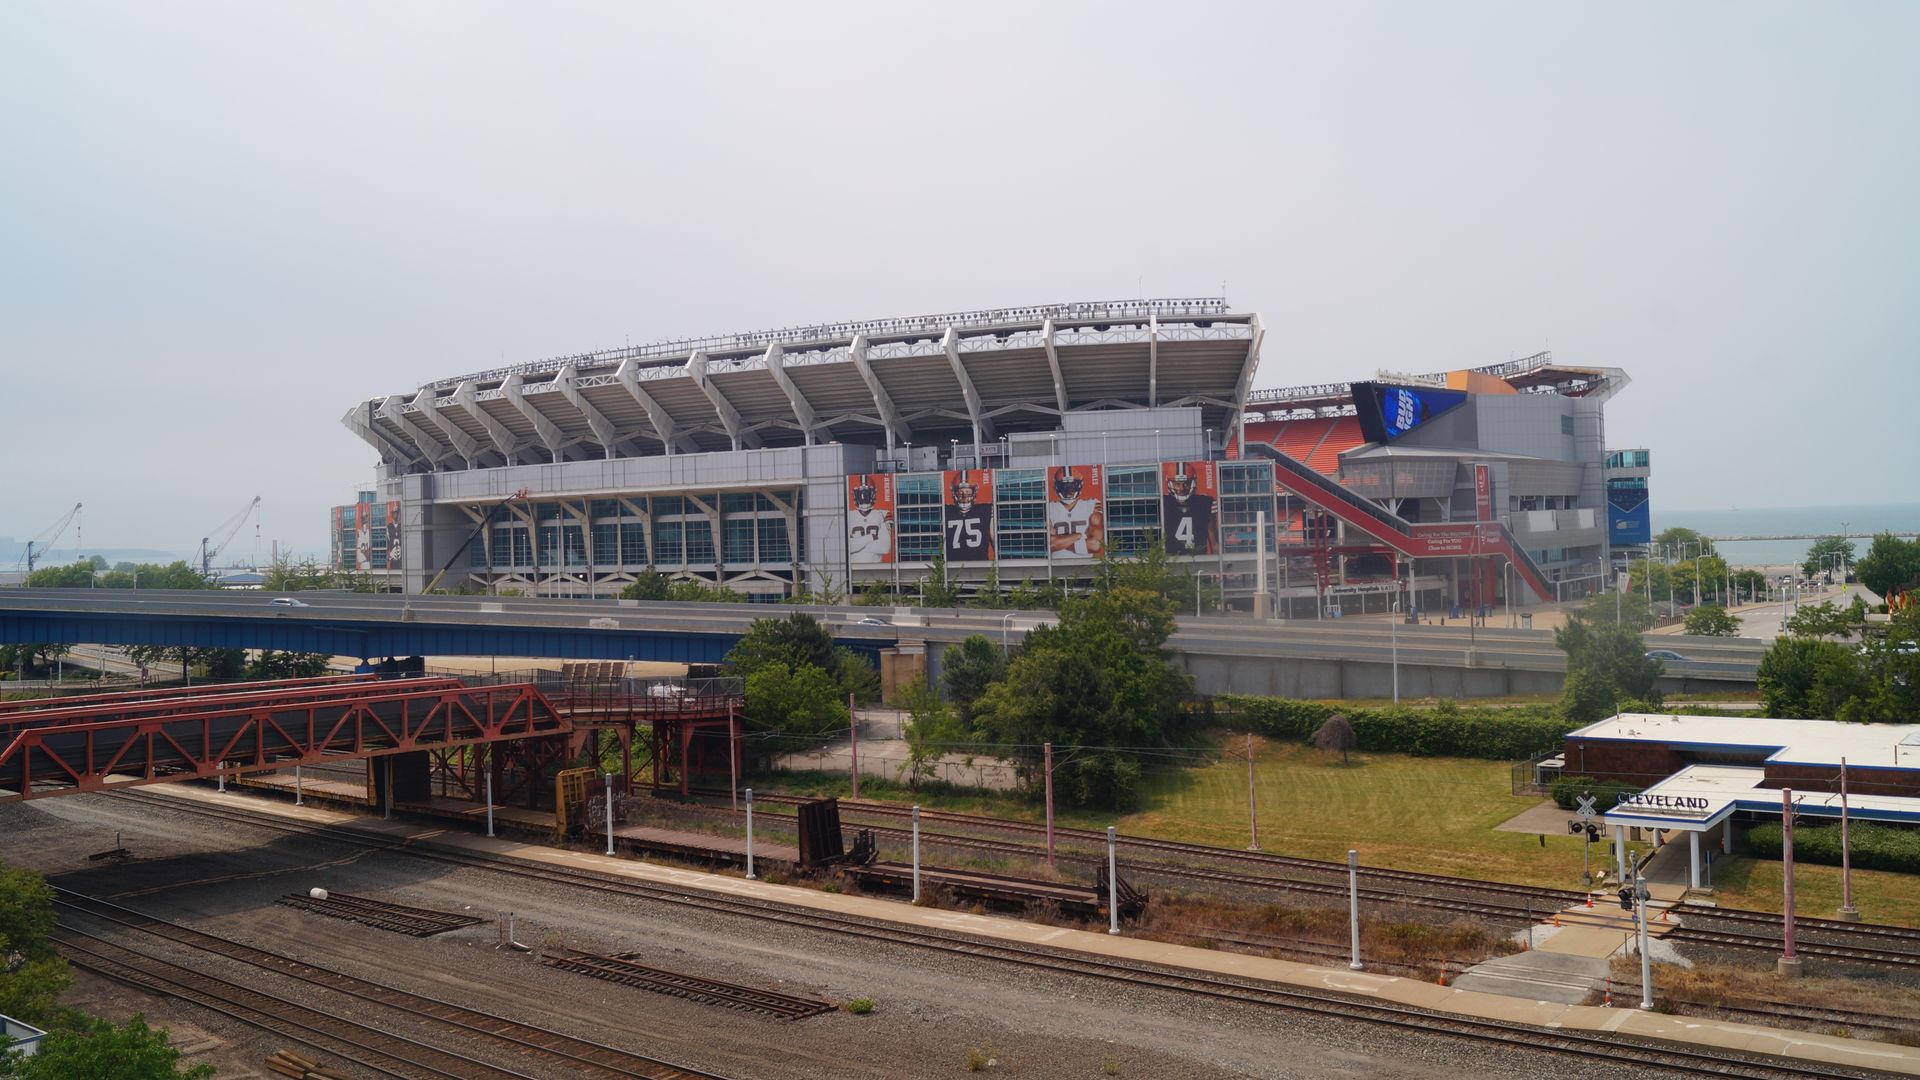 Cleveland Browns Stadium in front of an overcast sky